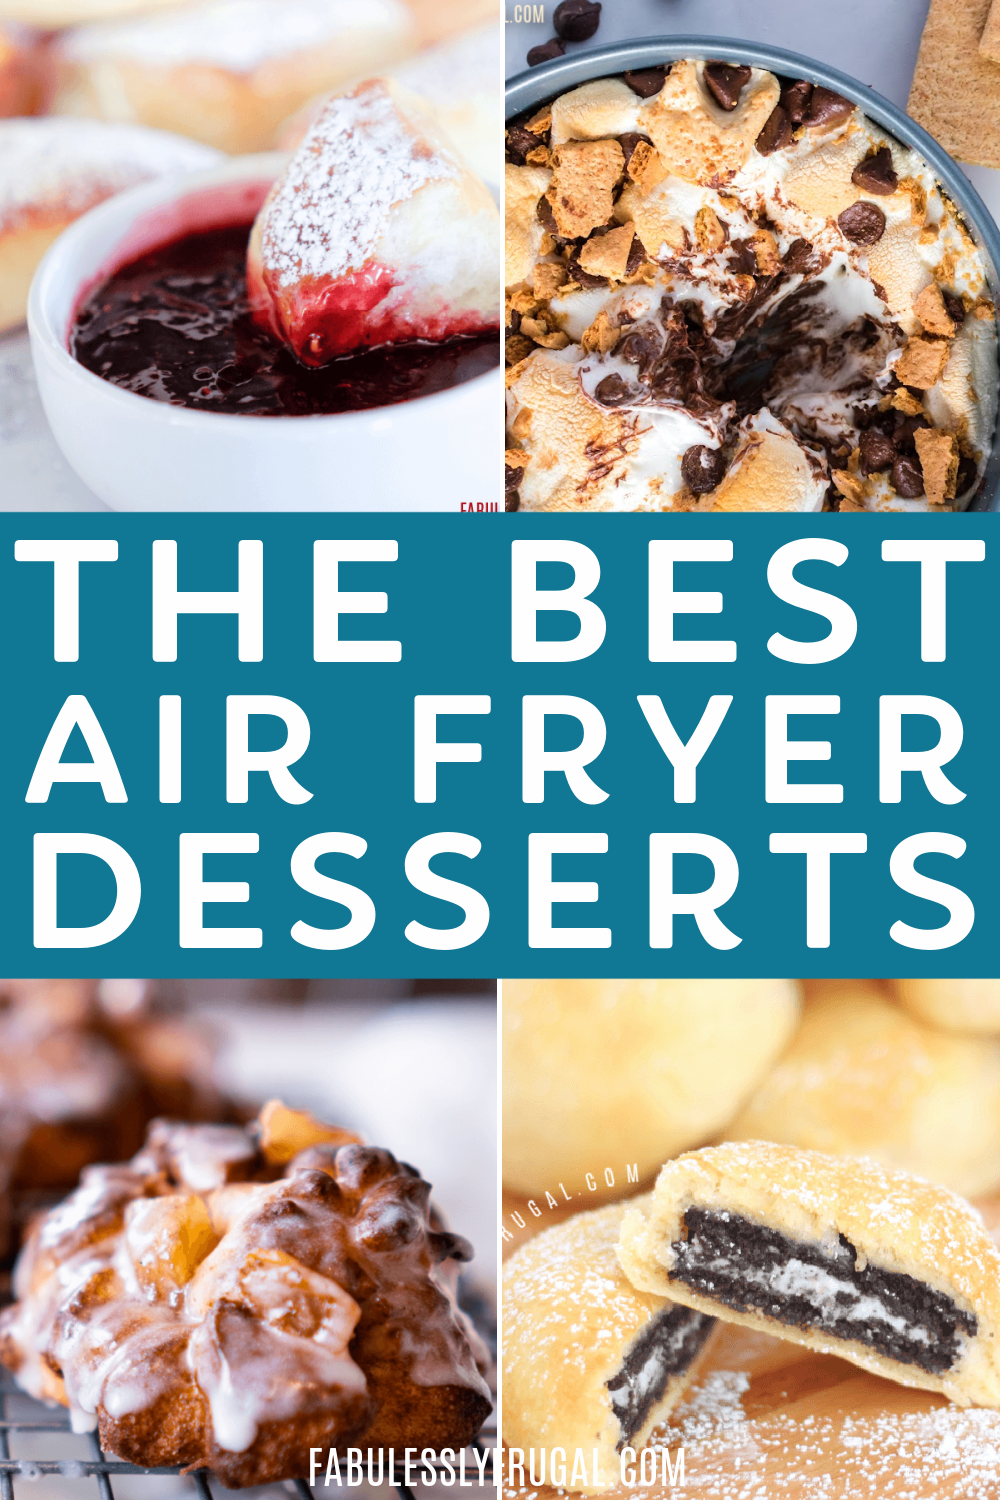 10 of The Best Easy Air Fryer Recipes For Kids! - My Fussy Eater